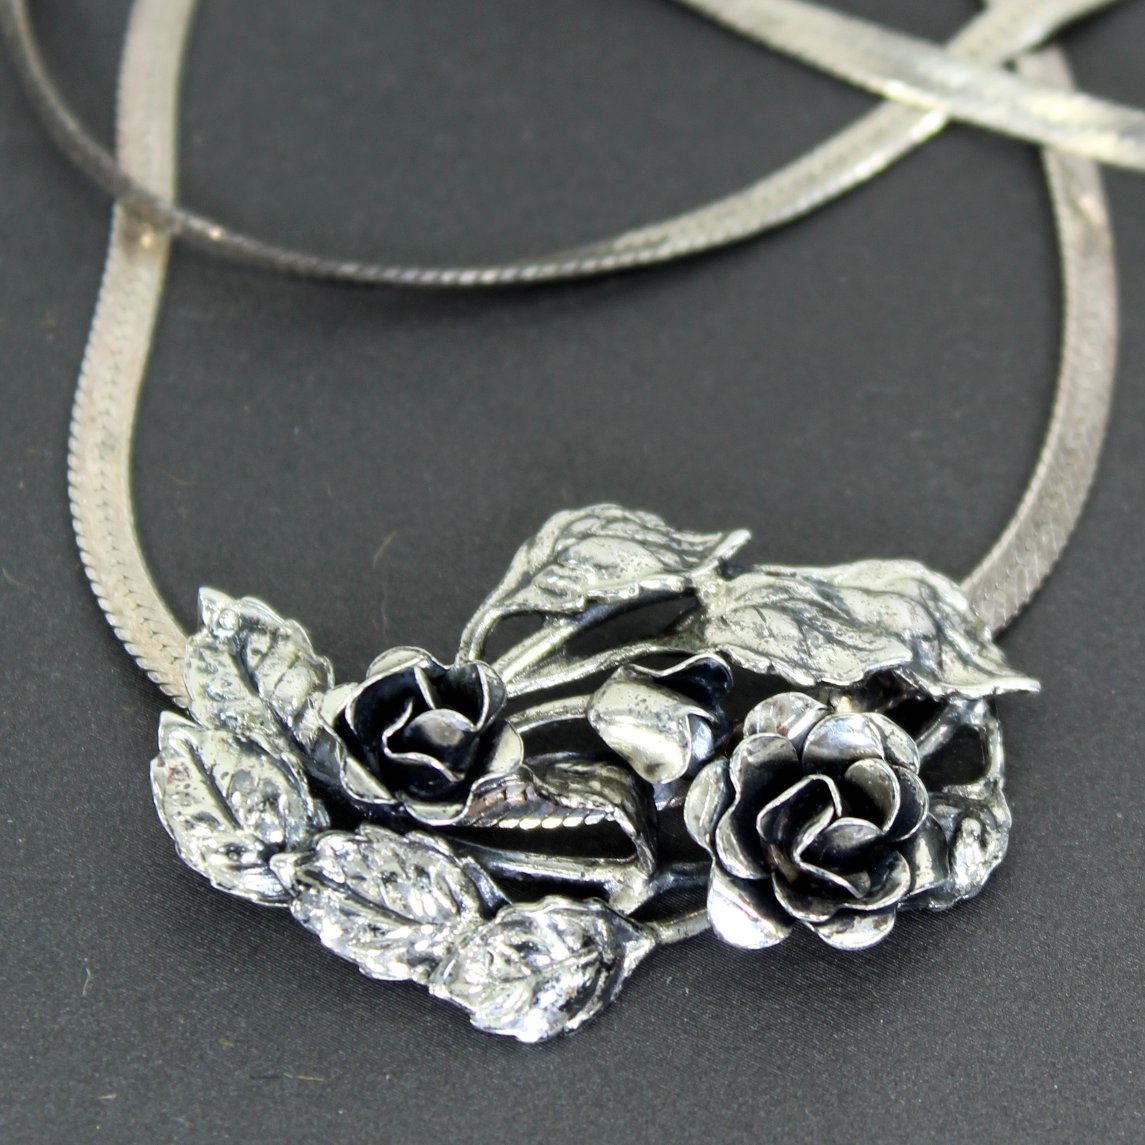 Danecraft Vintage Pendant Necklace 925 Sterling Dimensional Roses Leaves closeup of chain